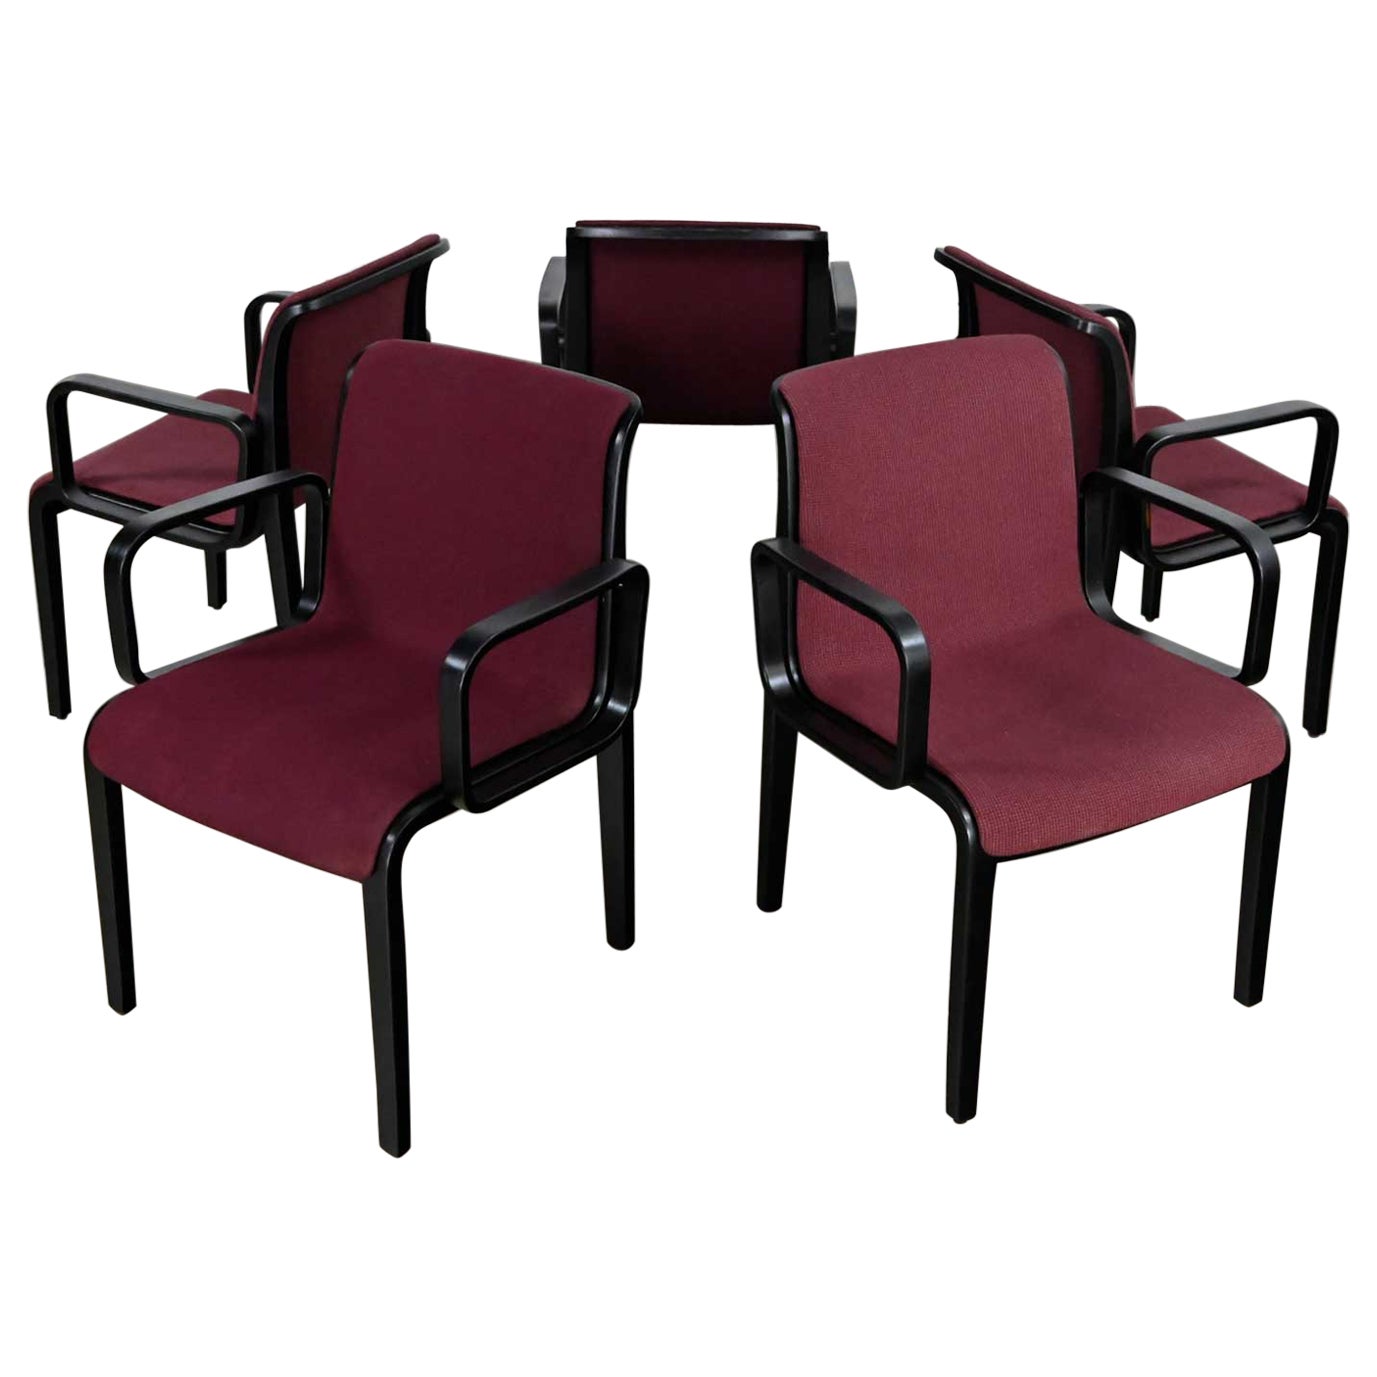 5 Knoll MCM Bentwood 1300 Series Dining Chairs Maroon & Black by Bill Stephens For Sale